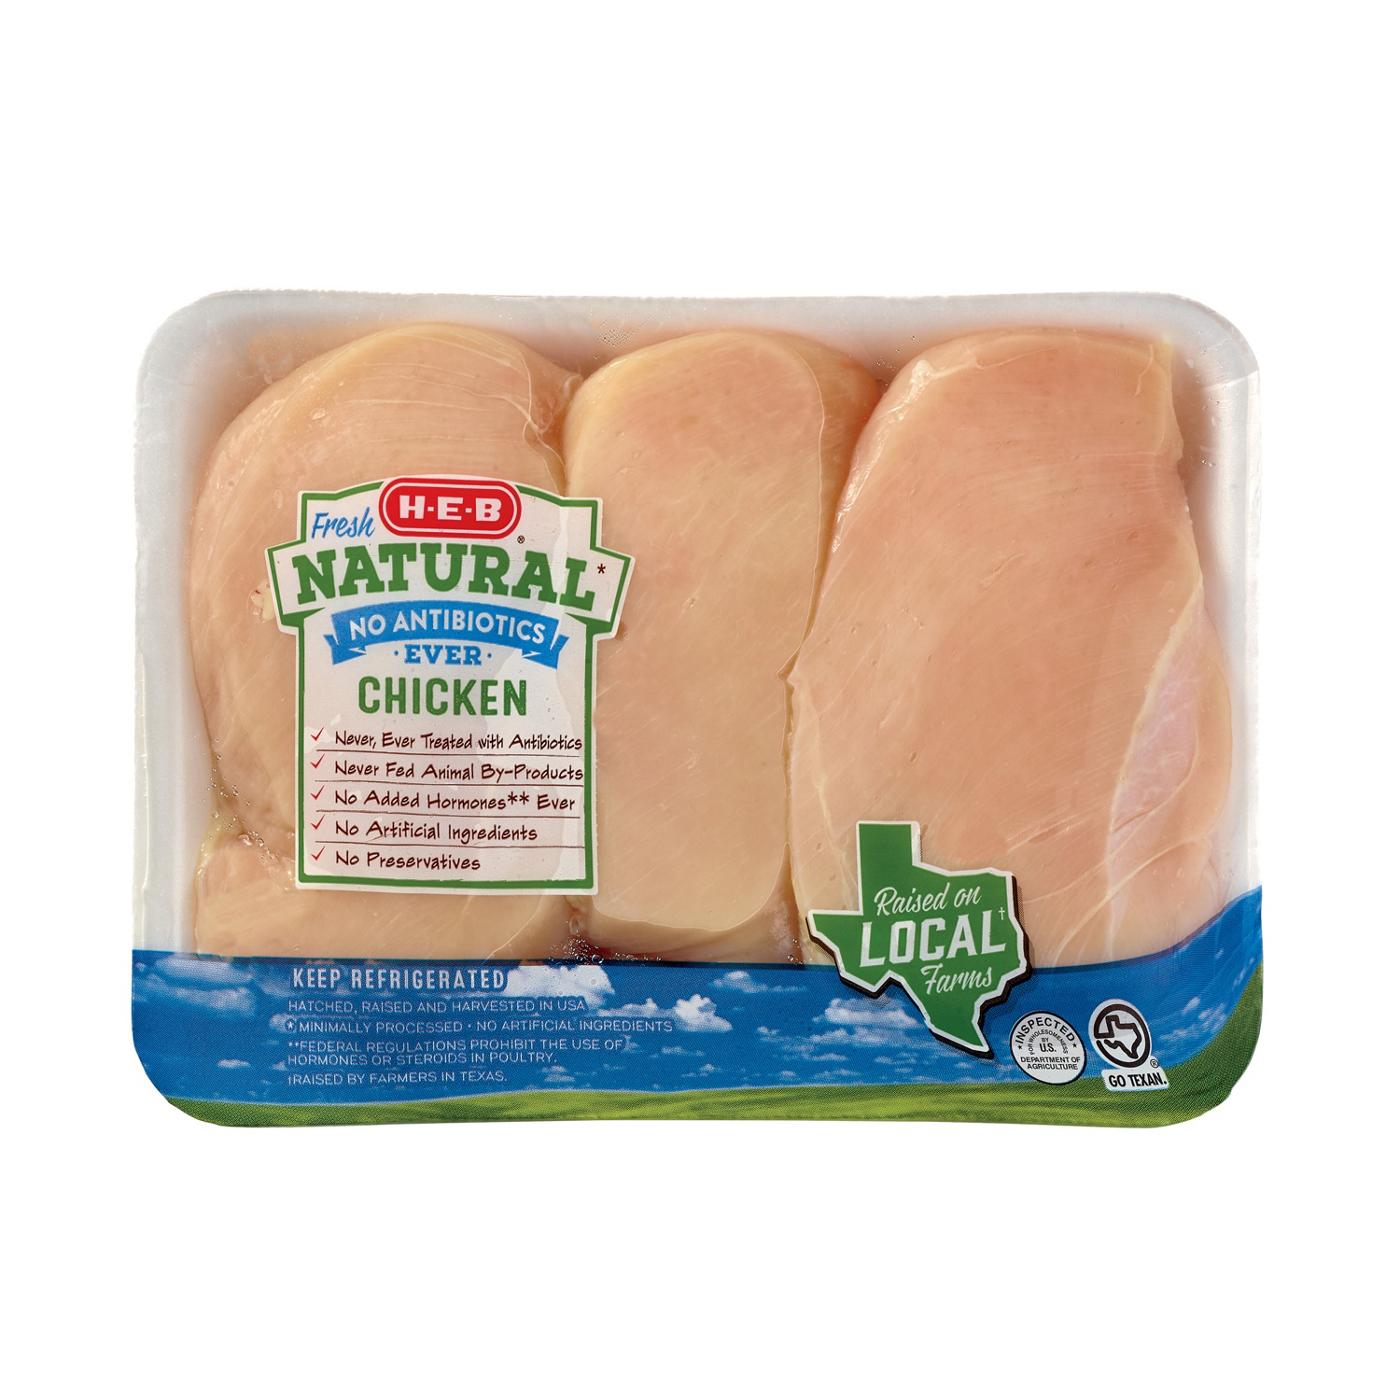 H-E-B Natural Boneless Chicken Breasts; image 1 of 3